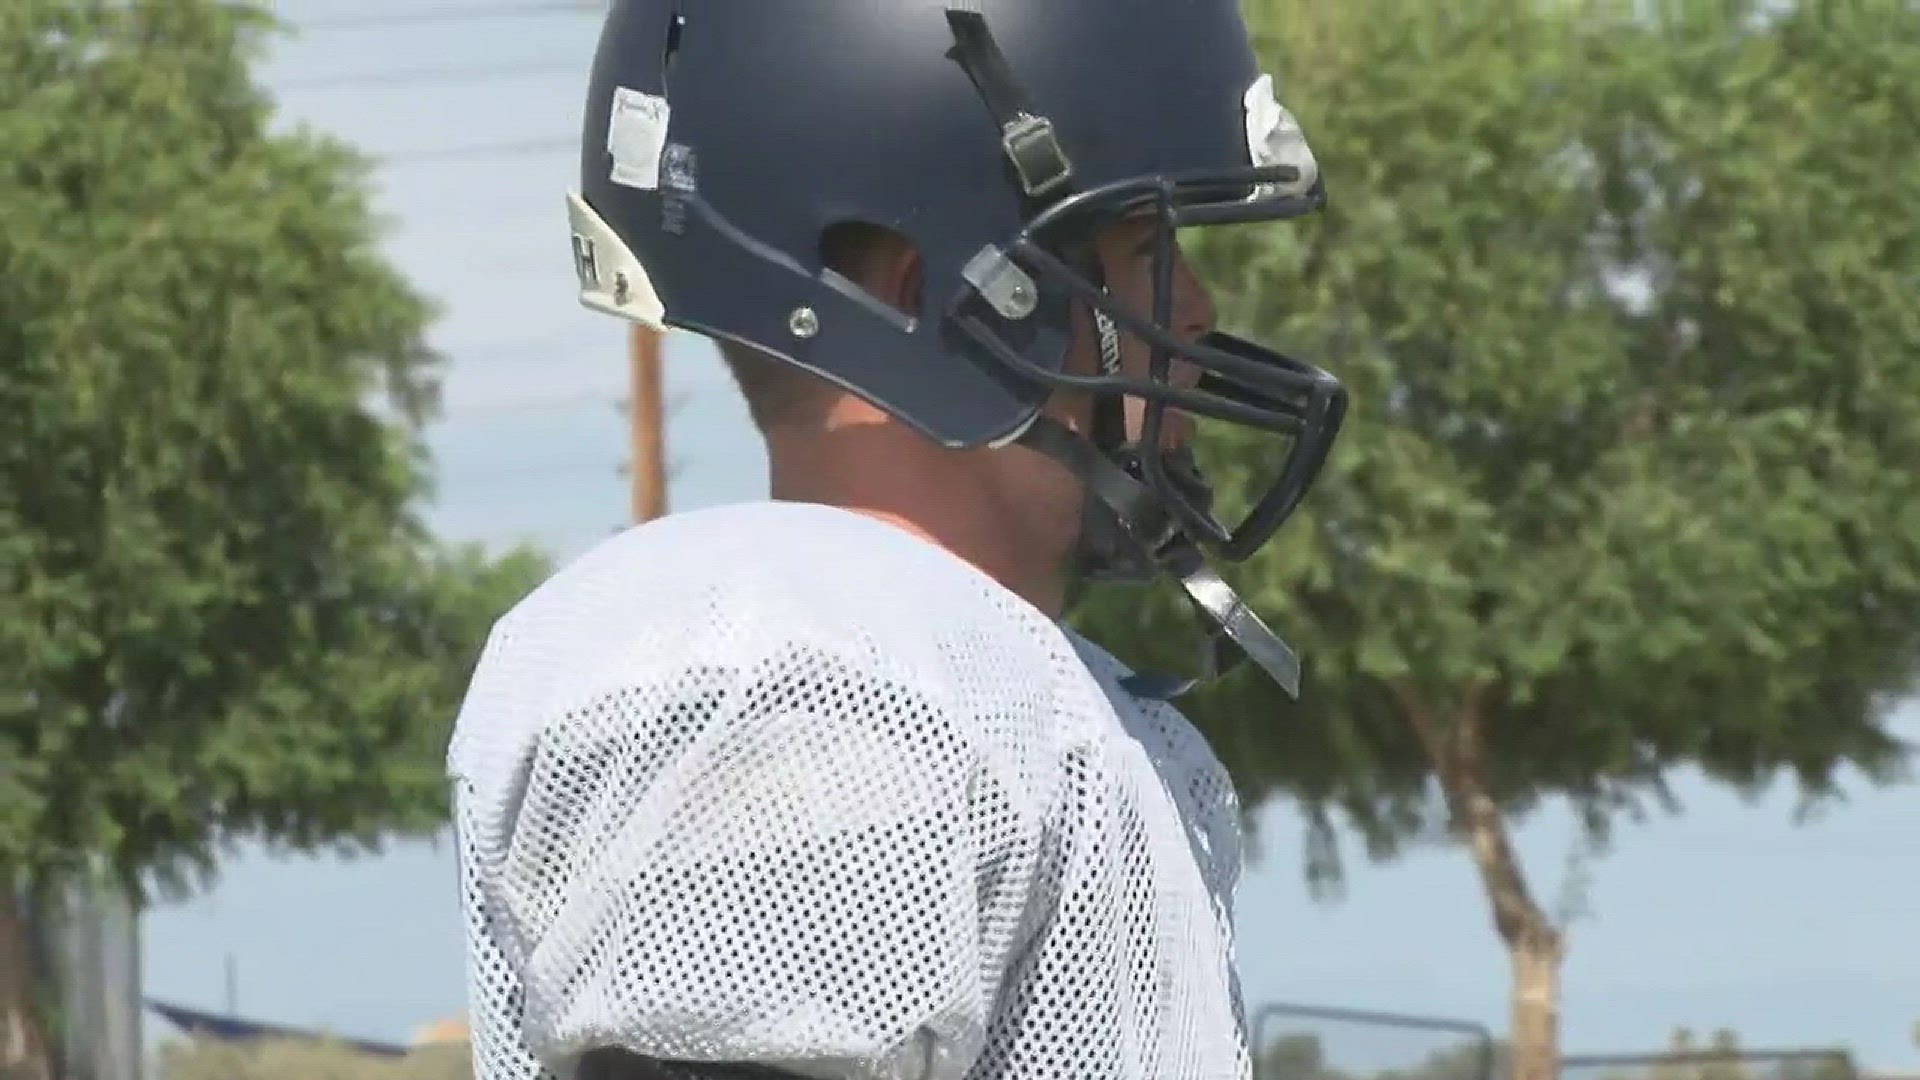 Could the Higley Knights be a dark horse contender in the fall?